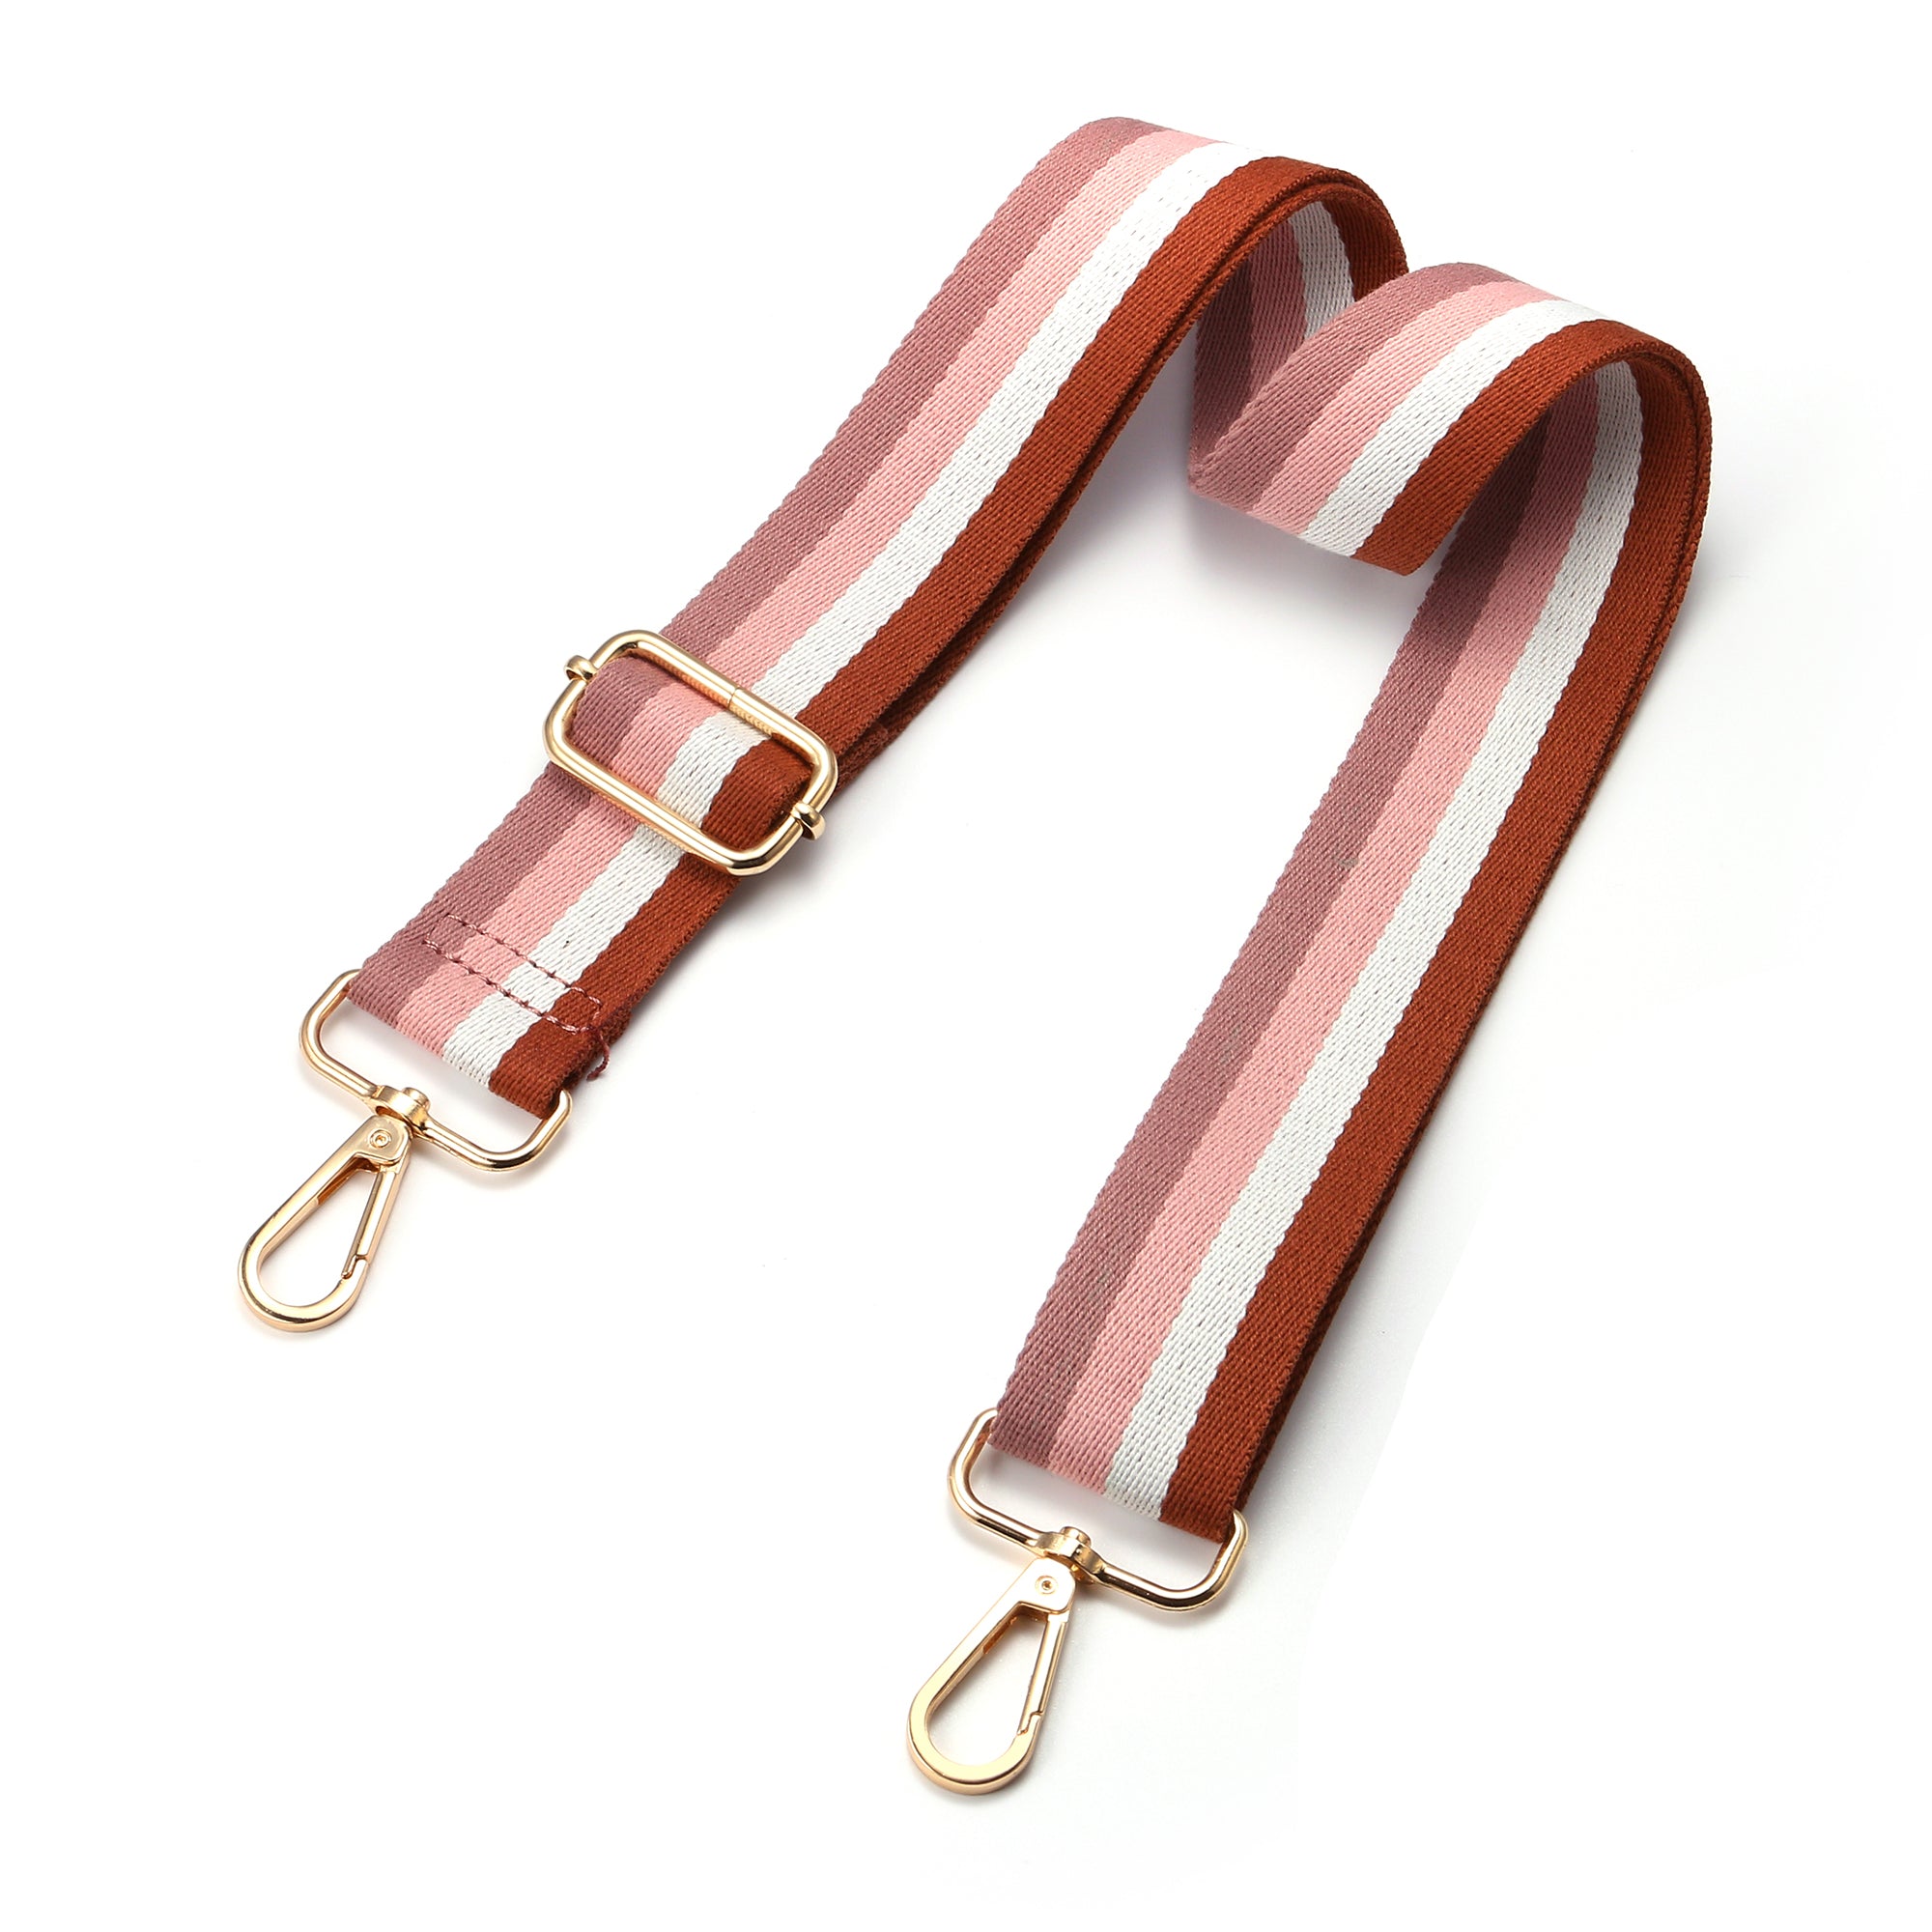 Replacement Purse Straps - Shop Leather Bag Replacement Straps